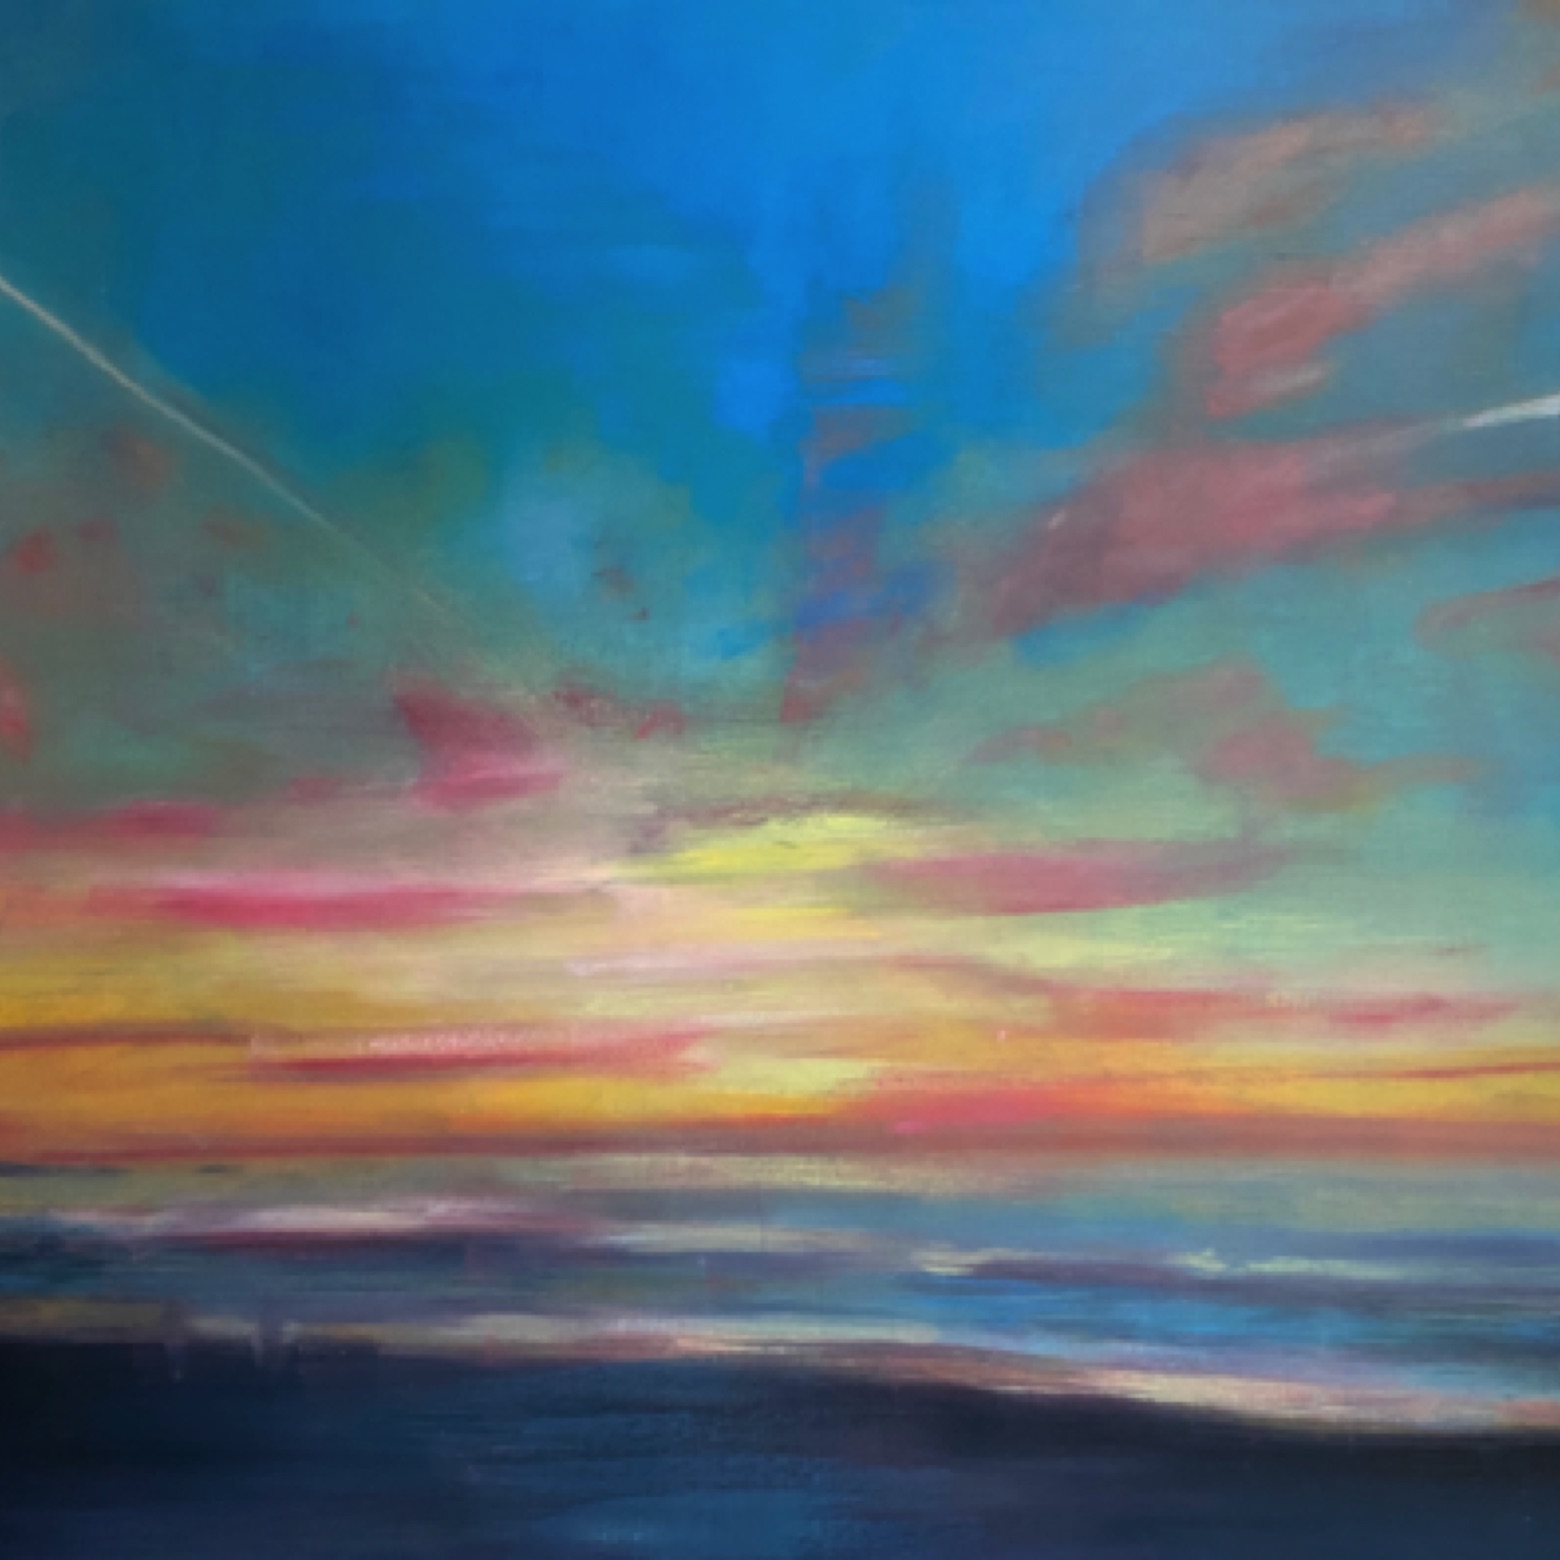 Gregg Chadwick 
The Great Sunset (Carmel) 
24”x30” oil on linen 2020
Kit Chesla Collection, Pacifica, California